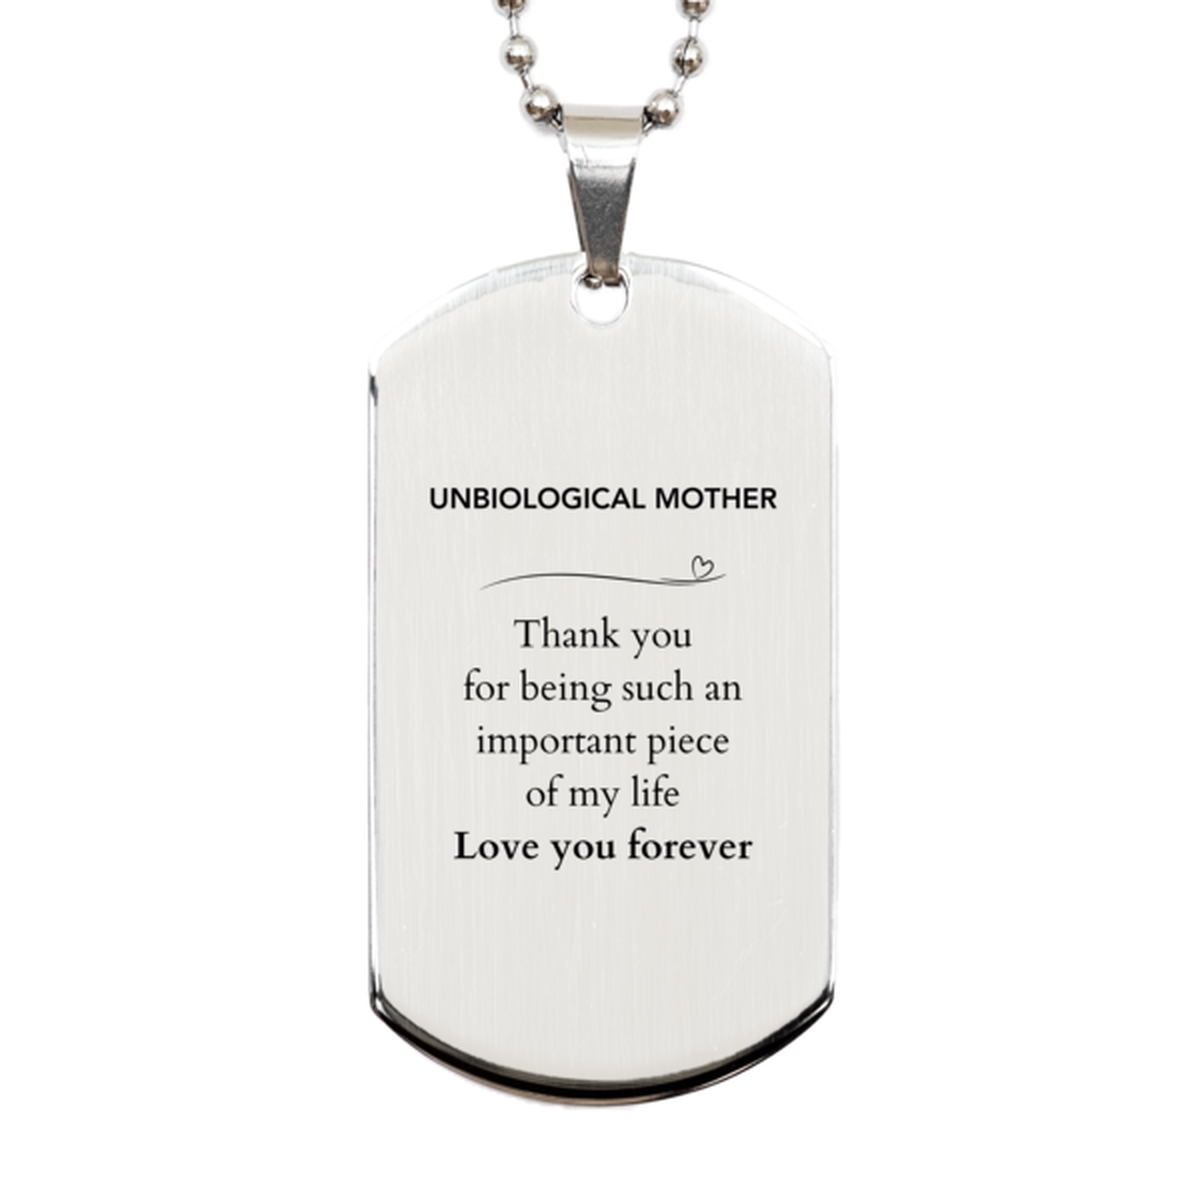 Appropriate Unbiological Mother Silver Dog Tag Epic Birthday Gifts for Unbiological Mother Thank you for being such an important piece of my life Unbiological Mother Christmas Mothers Fathers Day